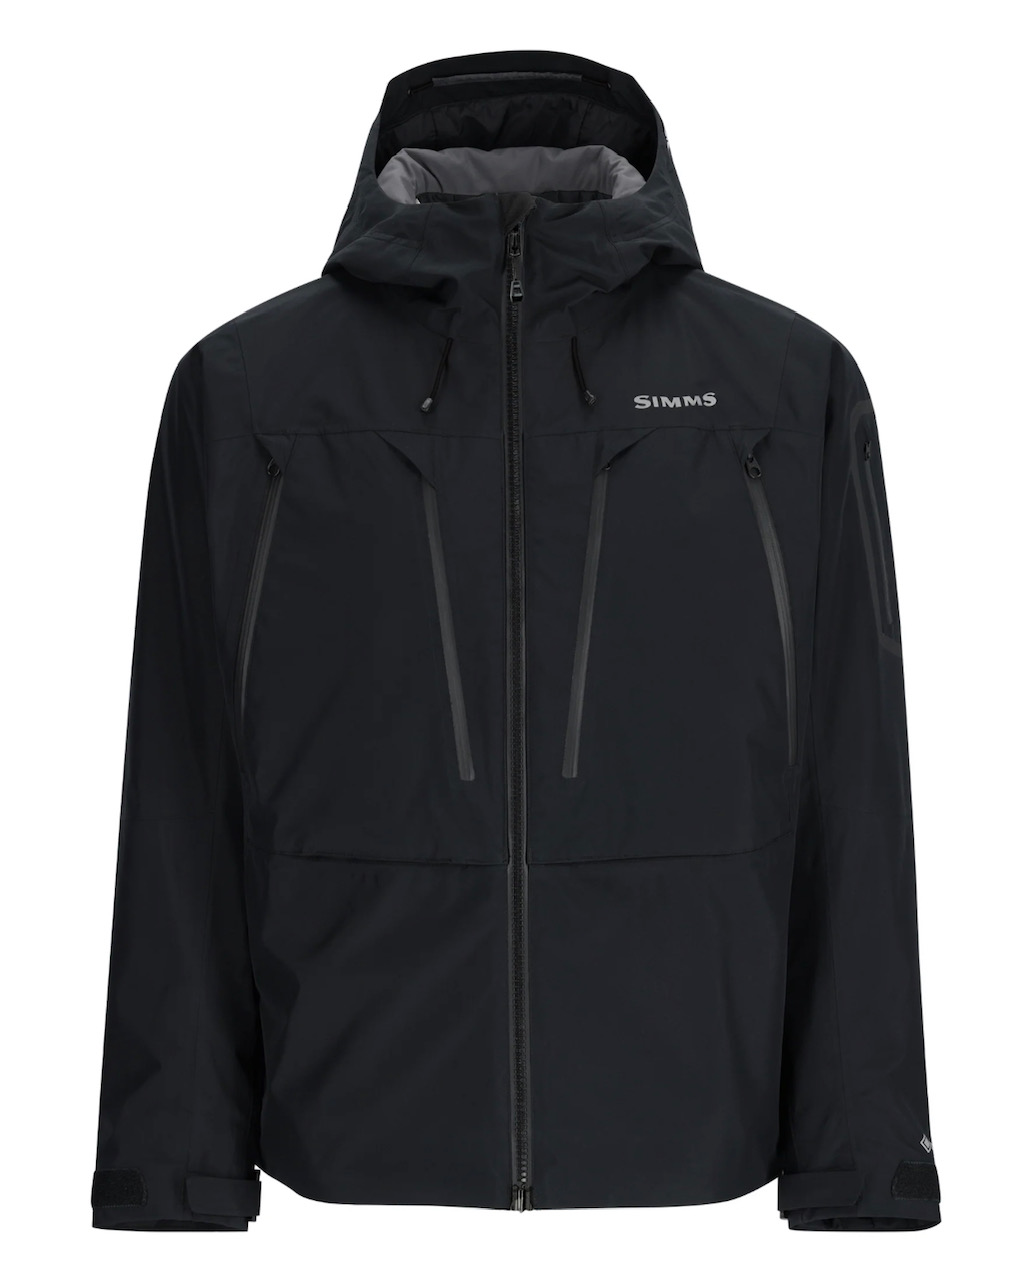 Simms M's Bulkley Insulated Jacket - Black - Large